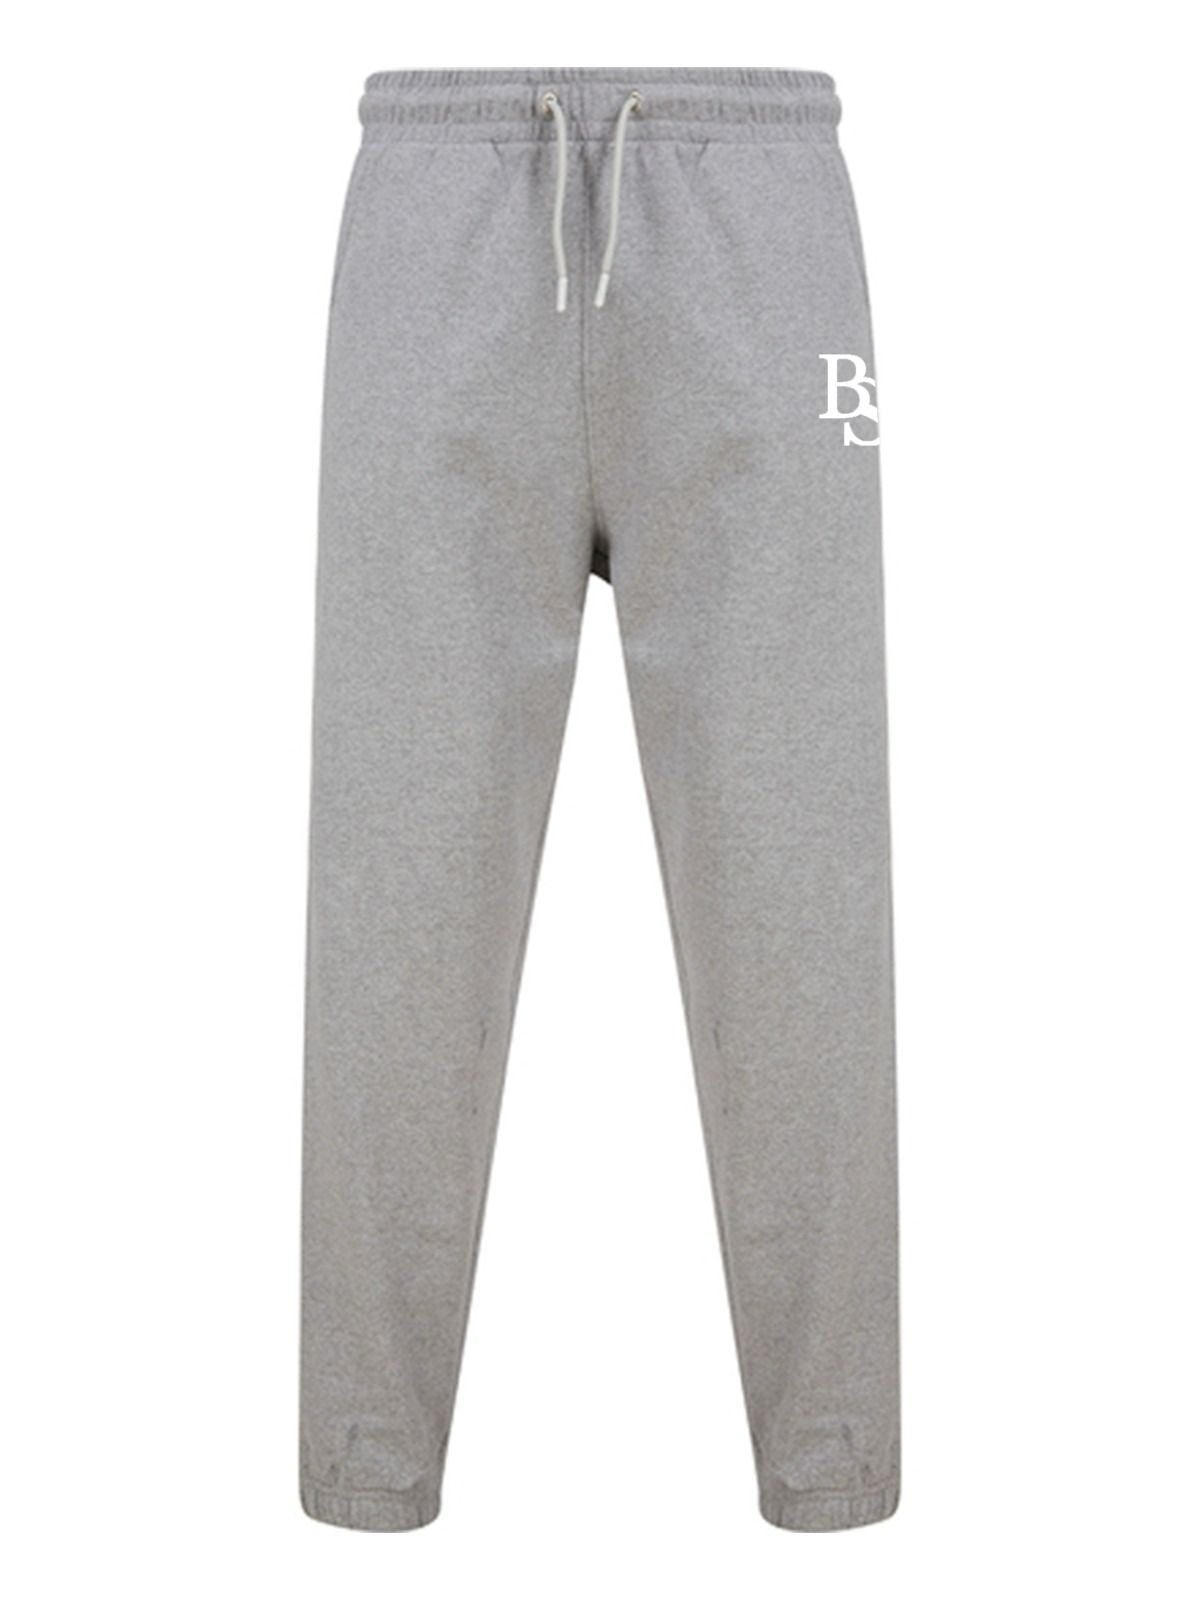 BSN COUTURE sweater - Grey